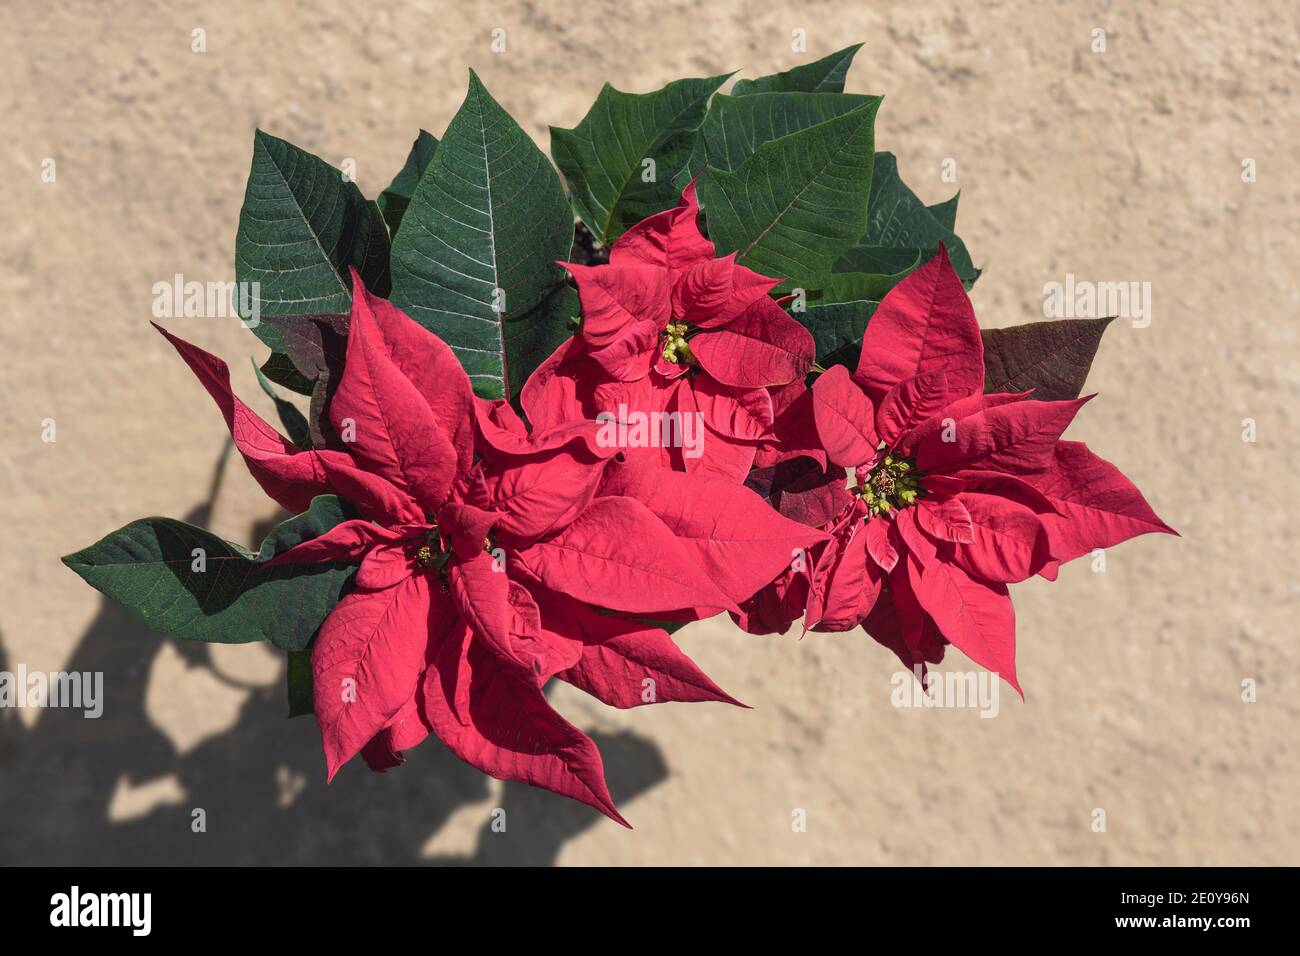 traditional flaming red poinsettia plant showing three clusters of flowers and bracts on a natural blurred sand background Stock Photo